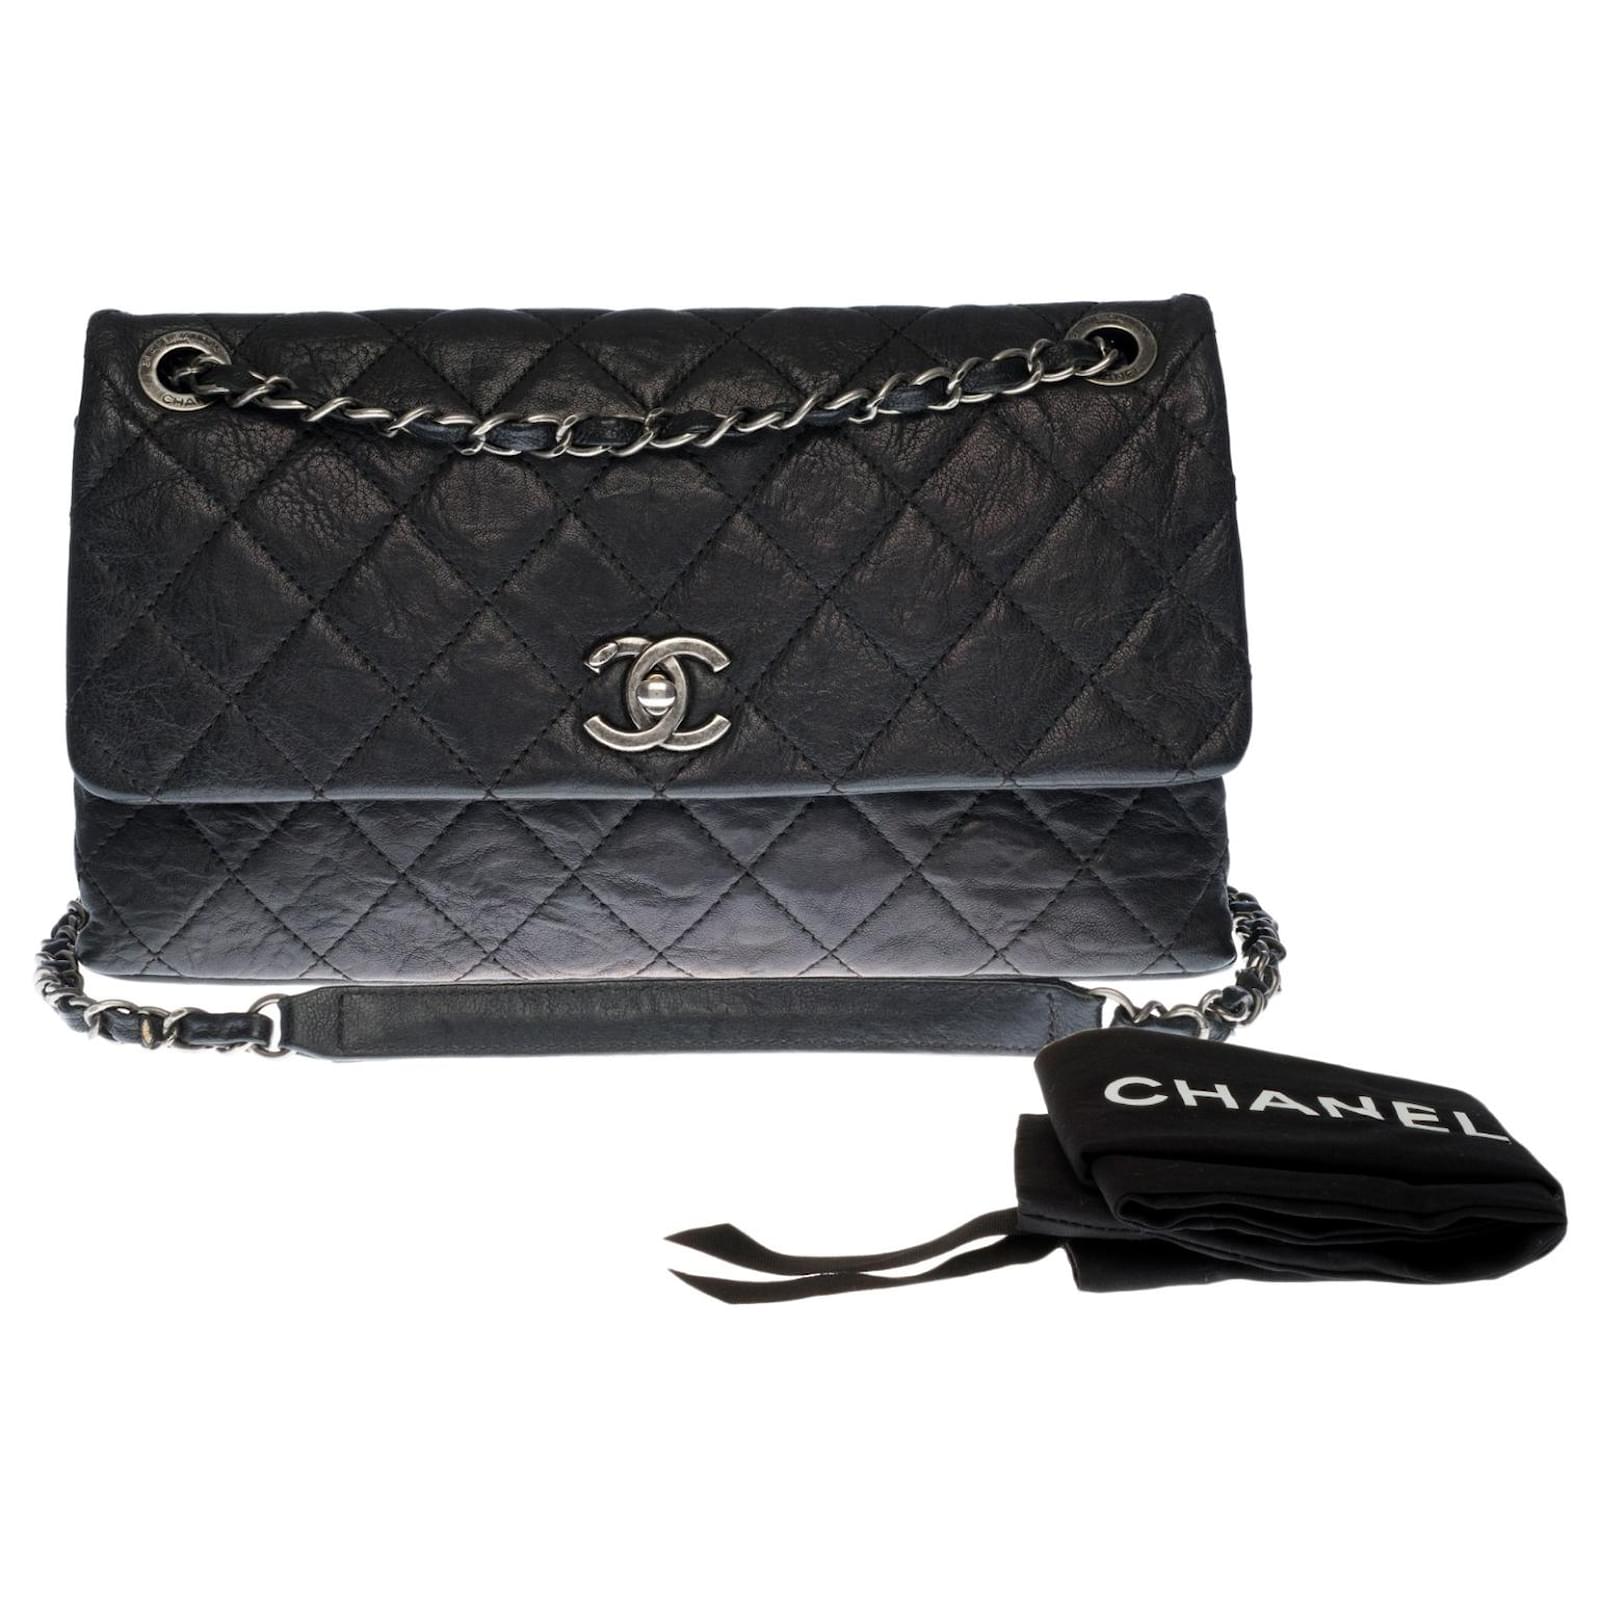 Timeless Very chic and Rare classic Chanel shoulder bag 31 rue